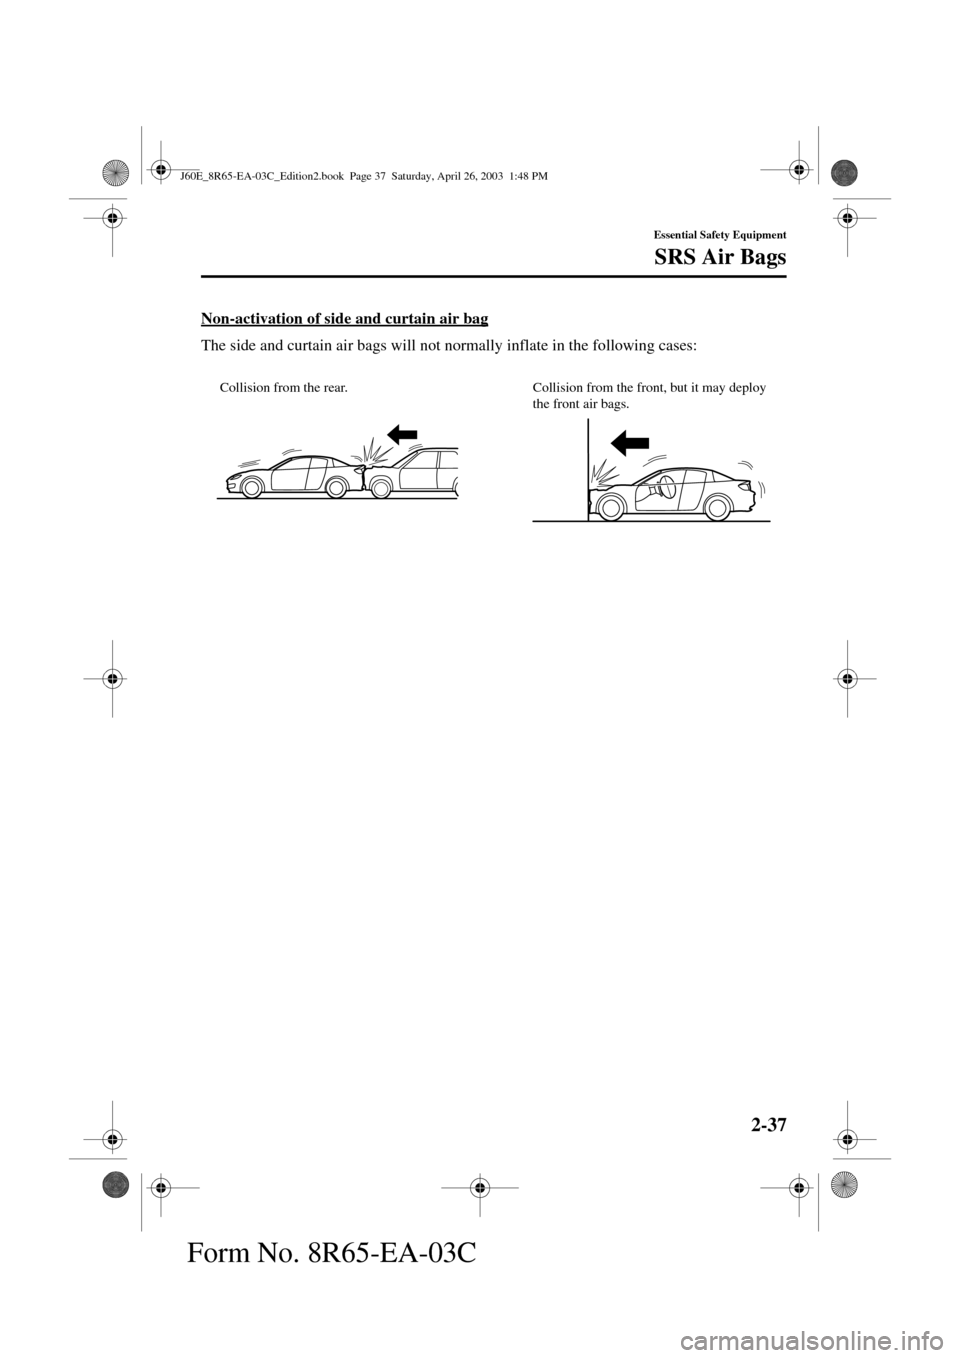 MAZDA MODEL RX 8 2004   (in English) Service Manual 2-37
Essential Safety Equipment
SRS Air Bags
Form No. 8R65-EA-03C
Non-activation of side and curtain air bag
The side and curtain air bags will not normally inflate in the following cases:
Collision f